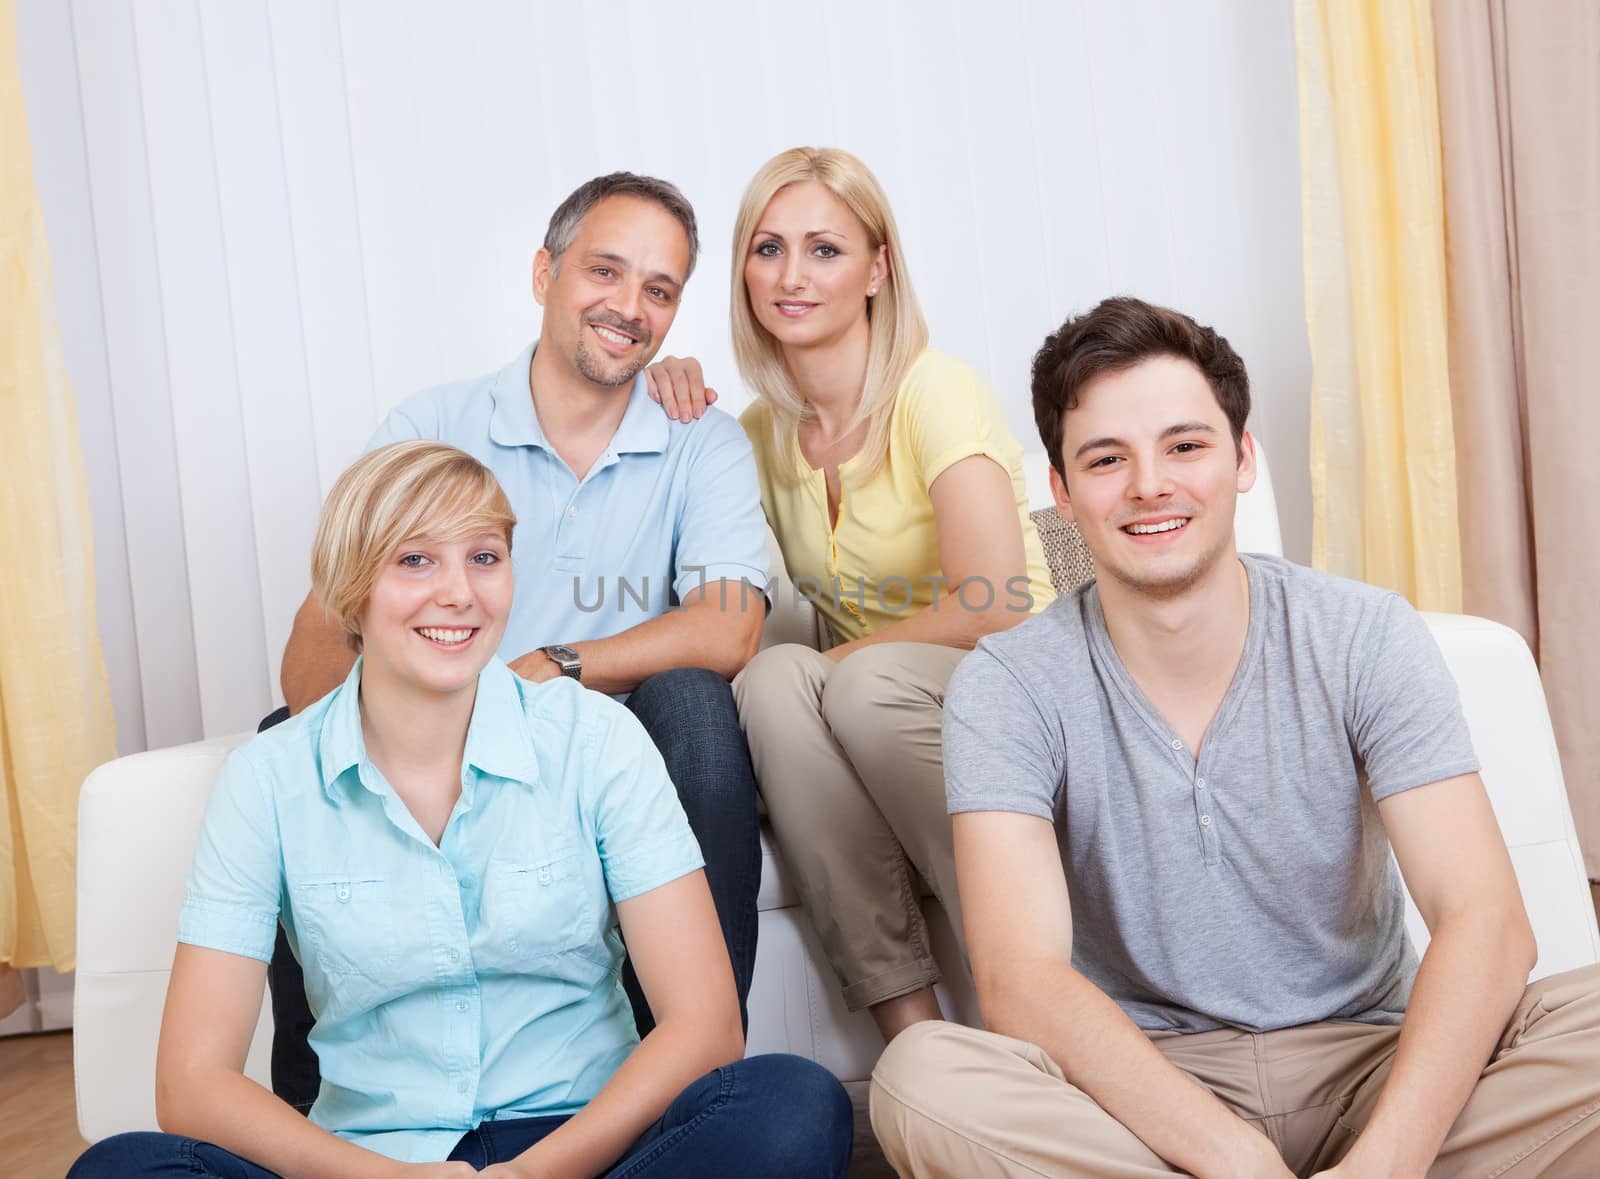 Smiling attractive young family with a teenage son and daughter posing together in group portrait